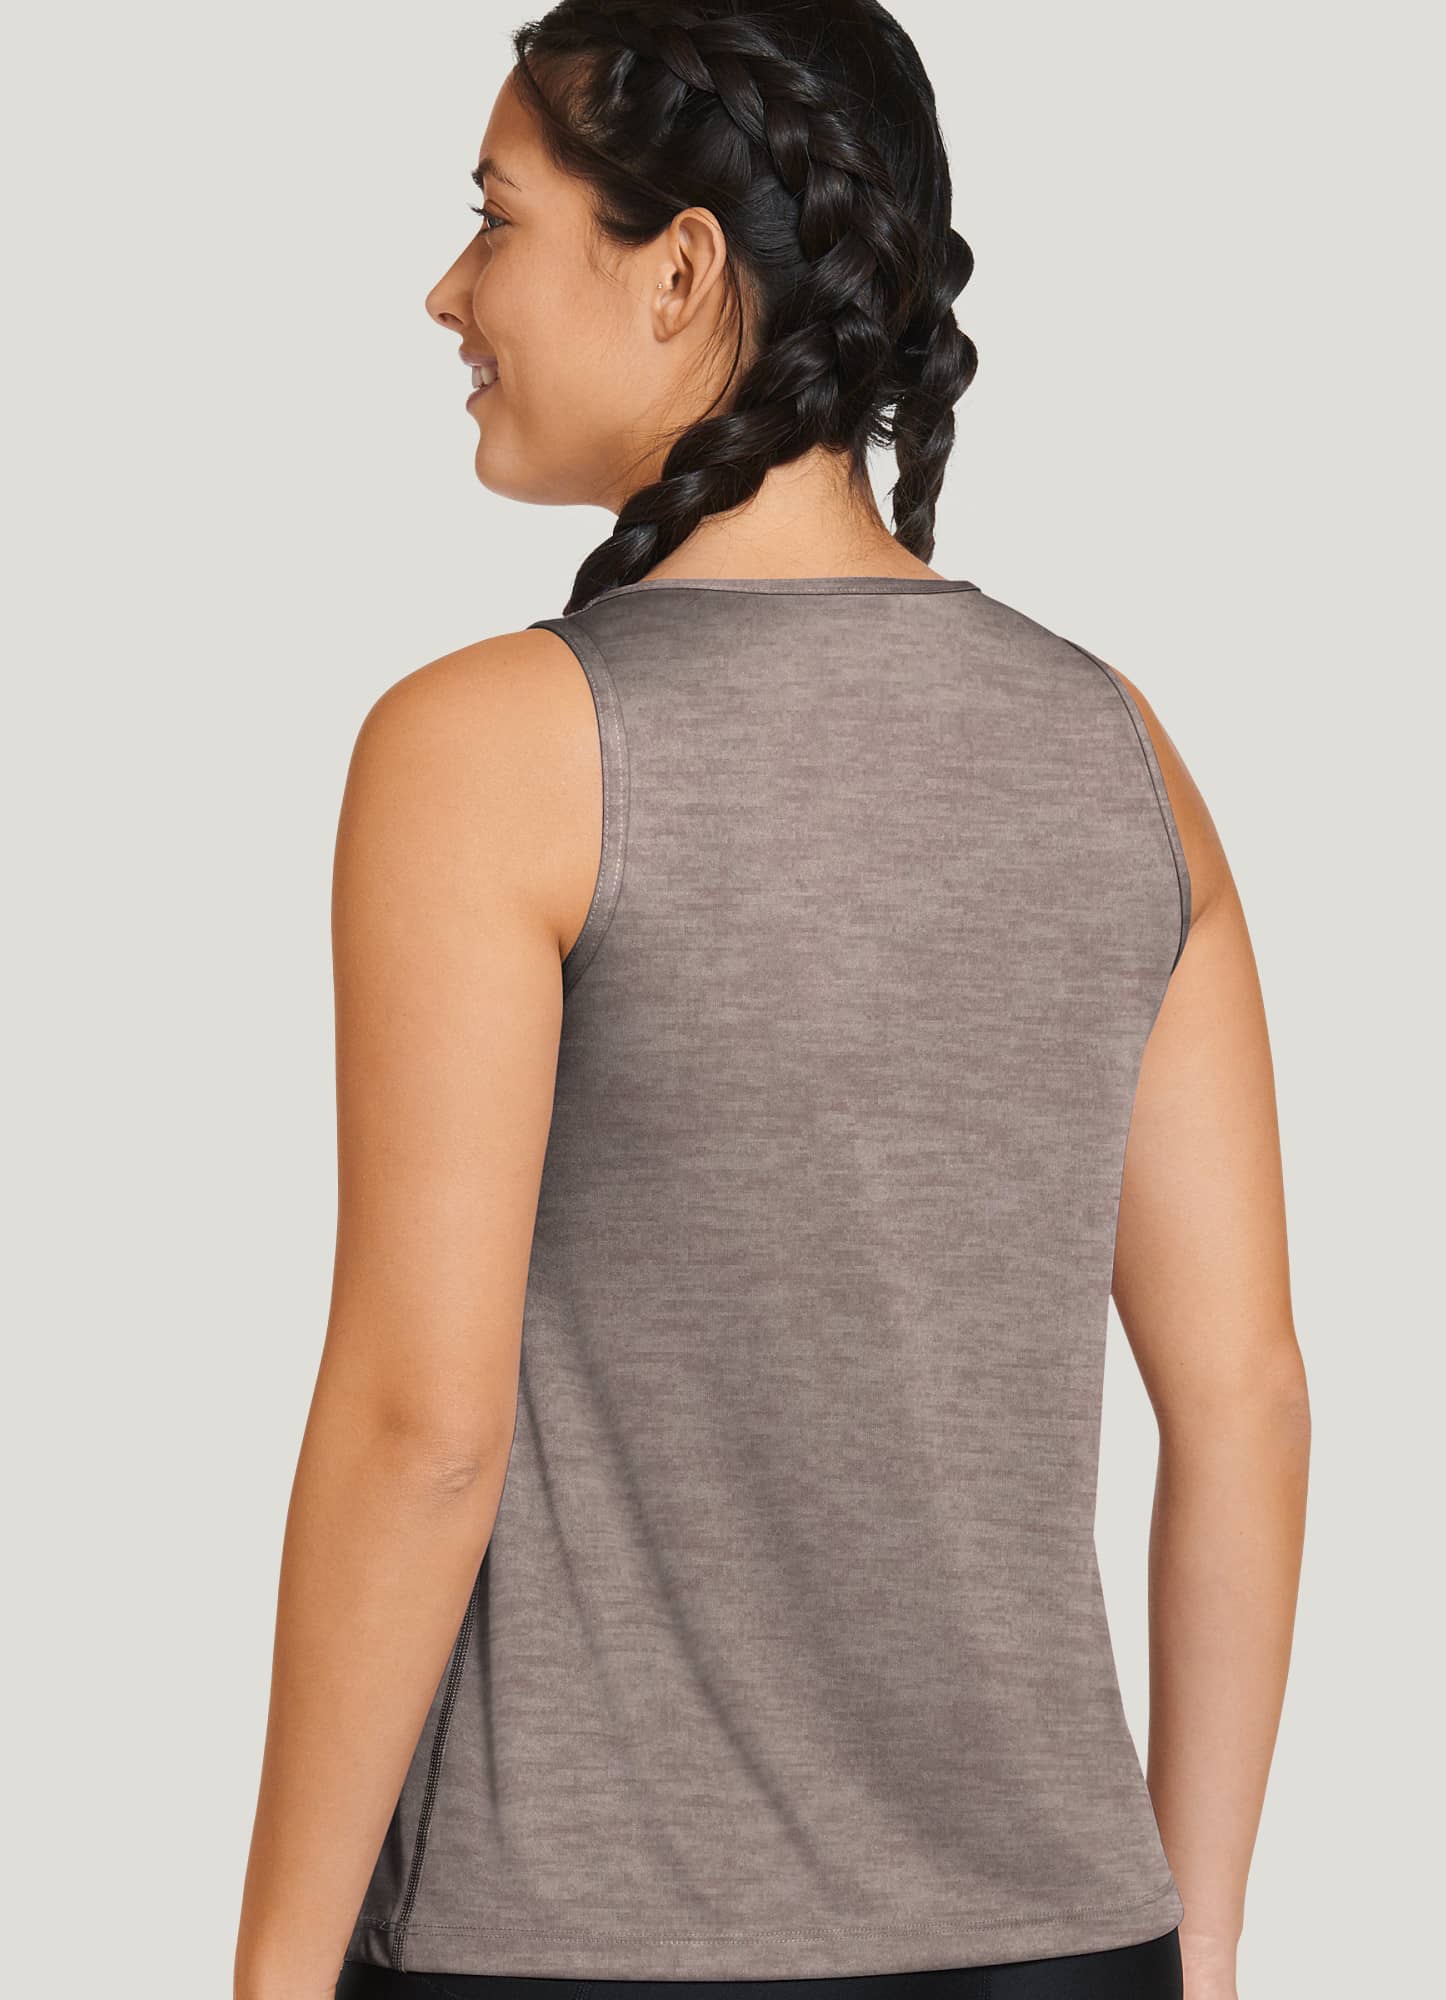 Buy Jockey 2500 Women's Super Combed Cotton Rich Thermal Tank Top